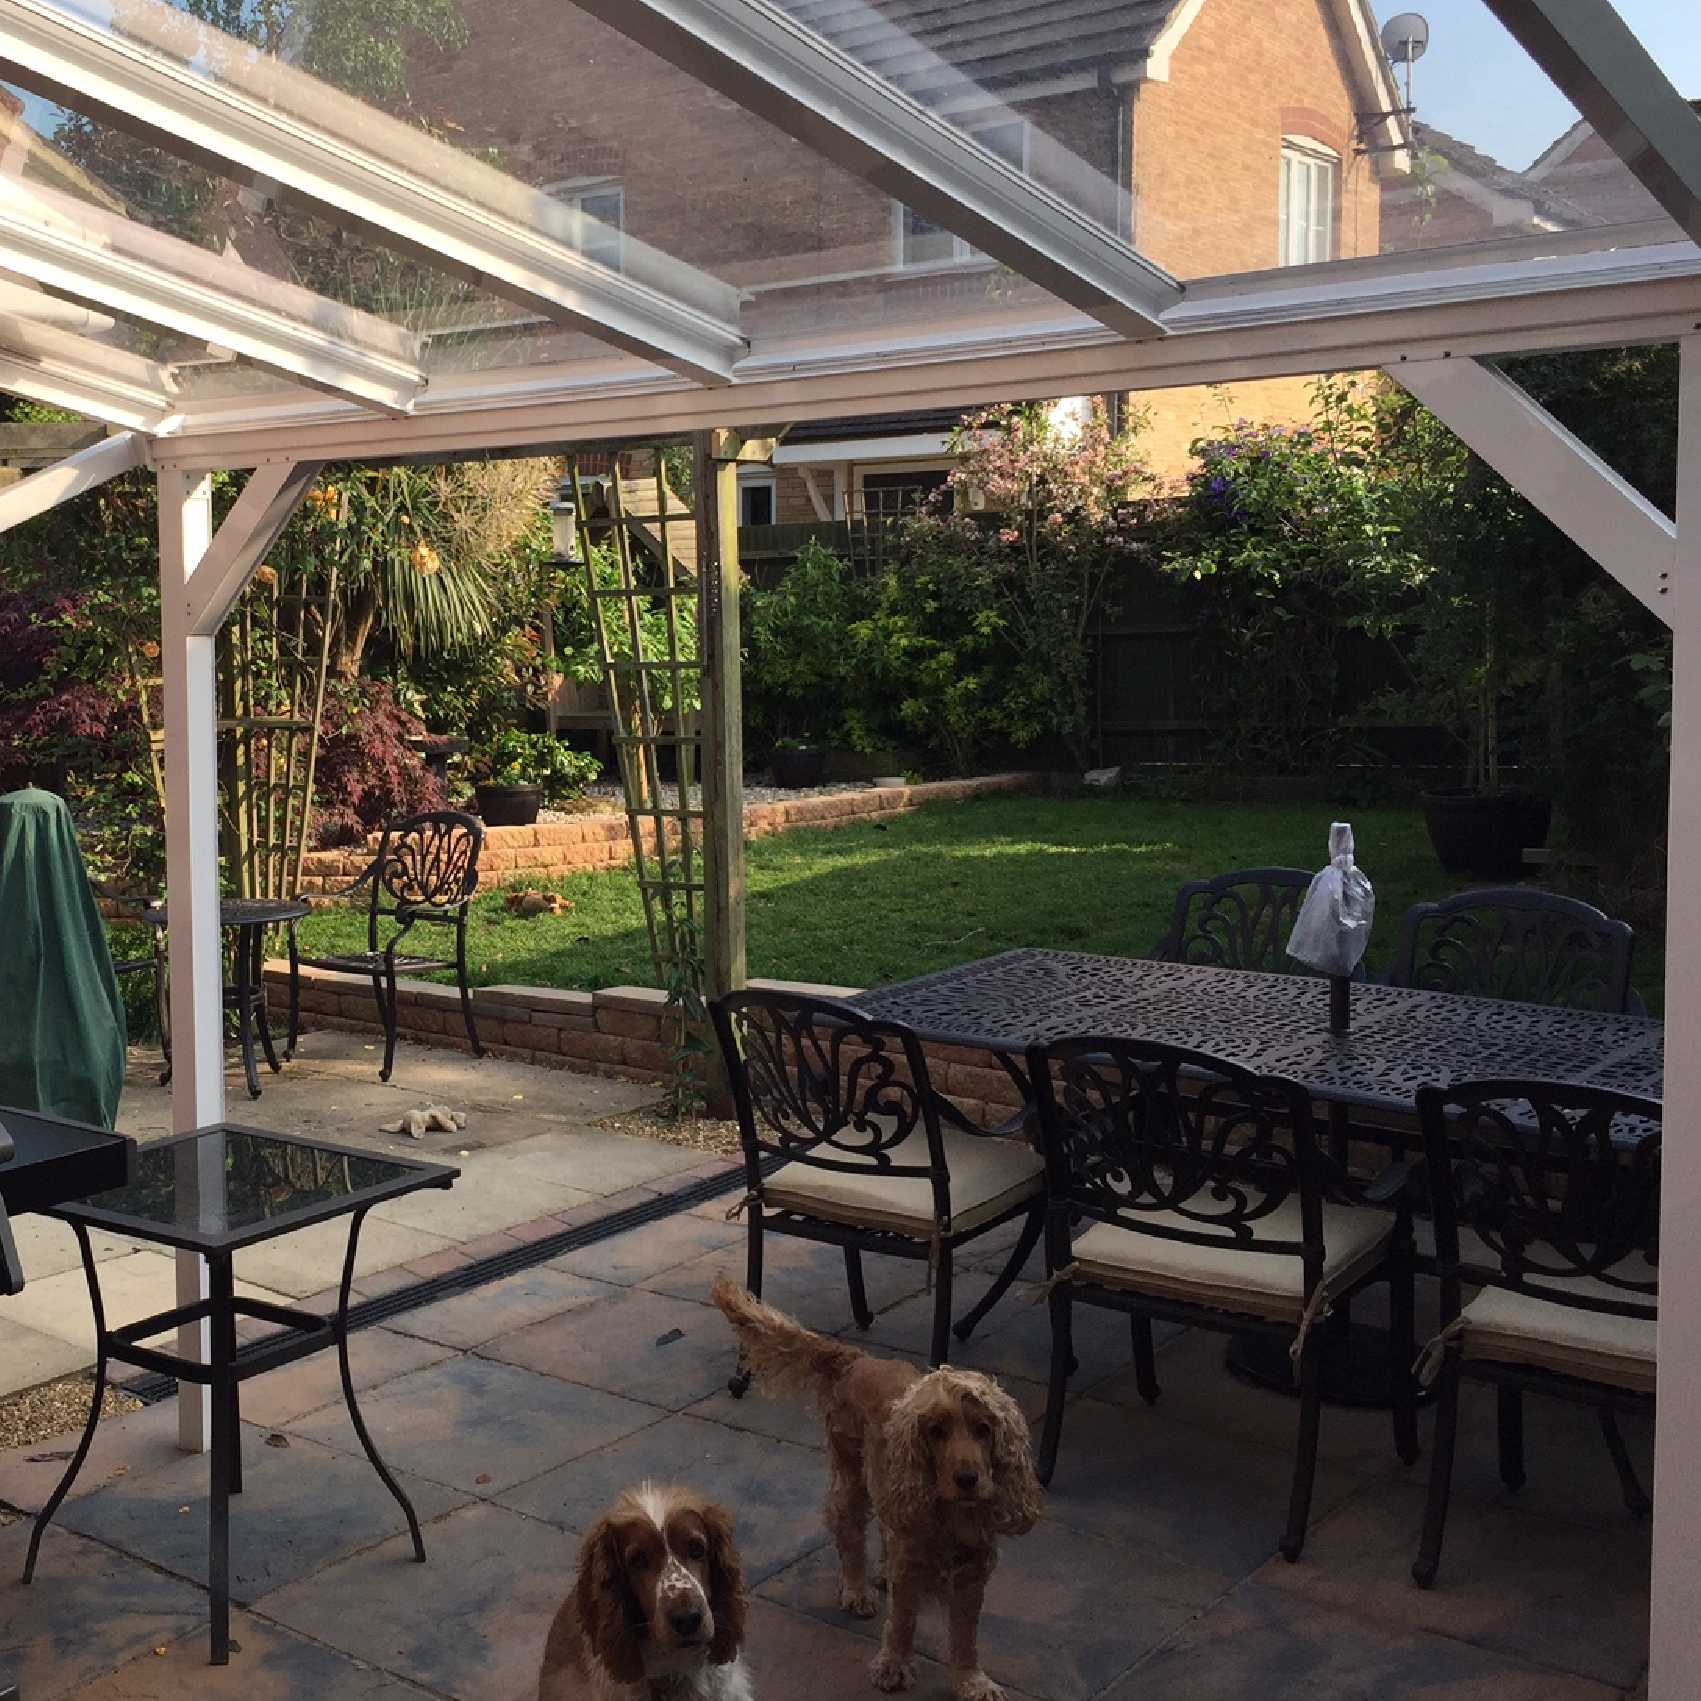 Affordable Omega Smart Lean-To Canopy, White UNGLAZED for 6mm Glazing - 9.8m (W) x 2.5m (P), (5) Supporting Posts